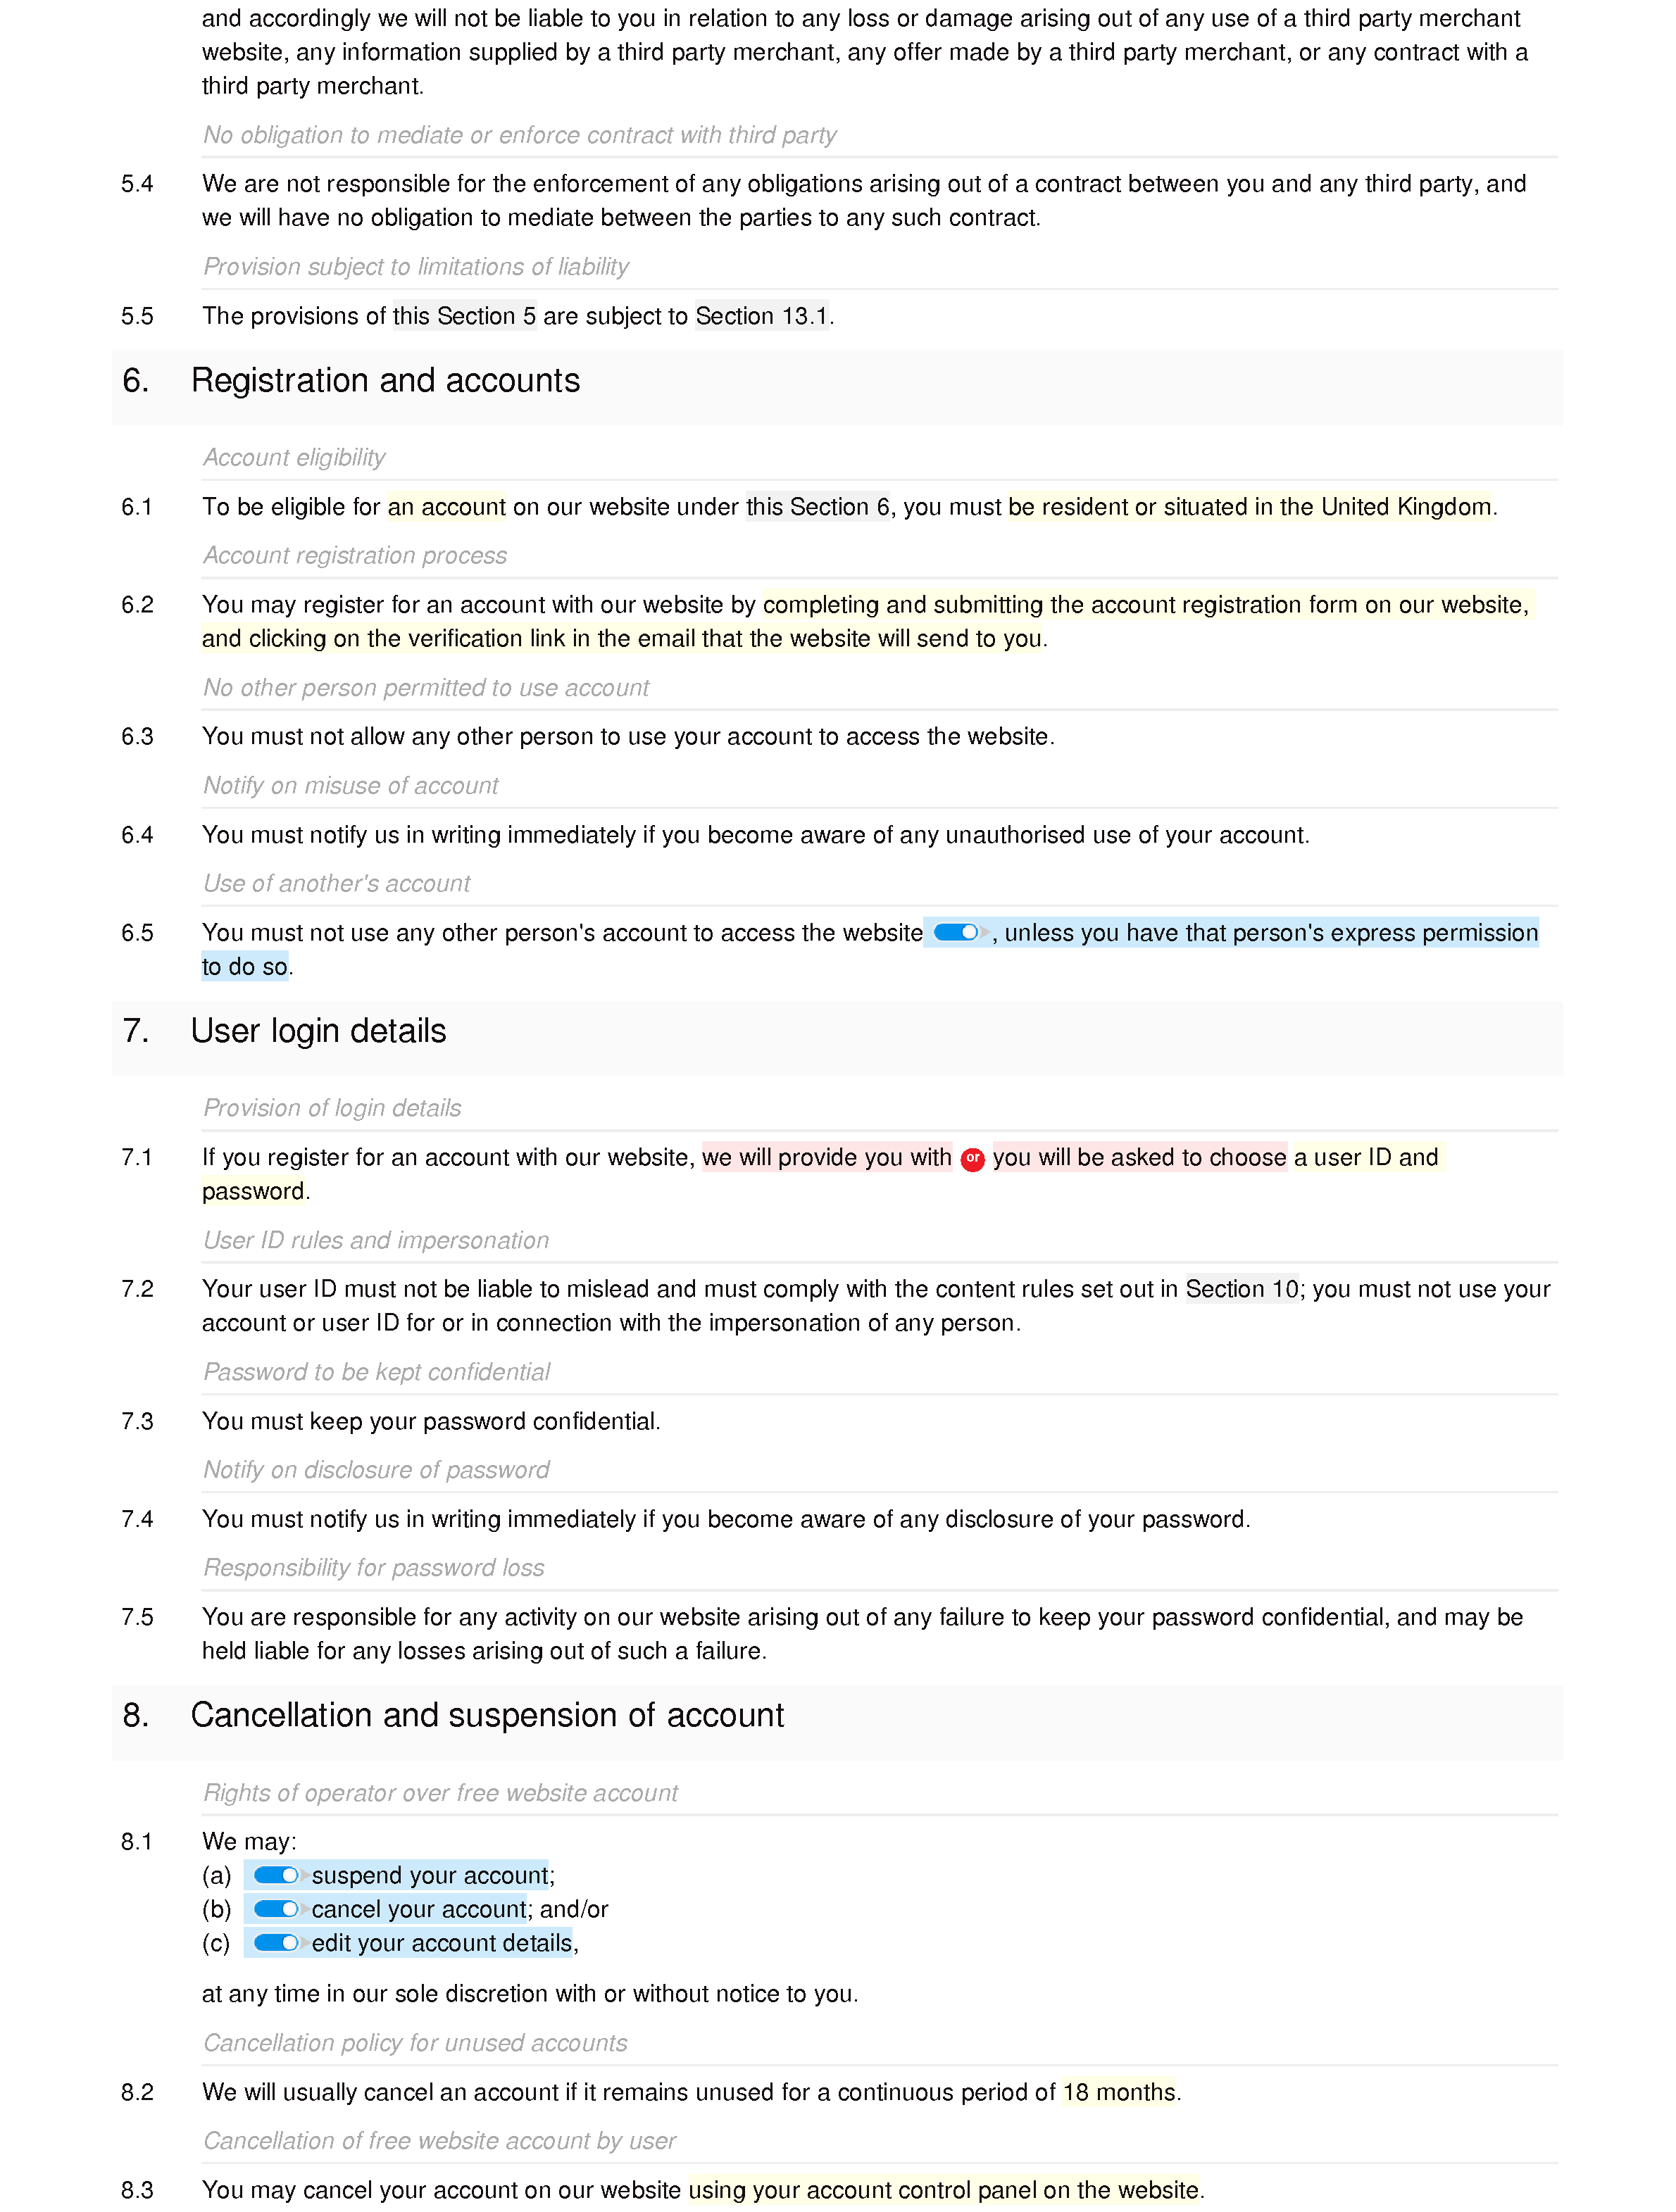 Affiliate website terms and conditions document editor preview